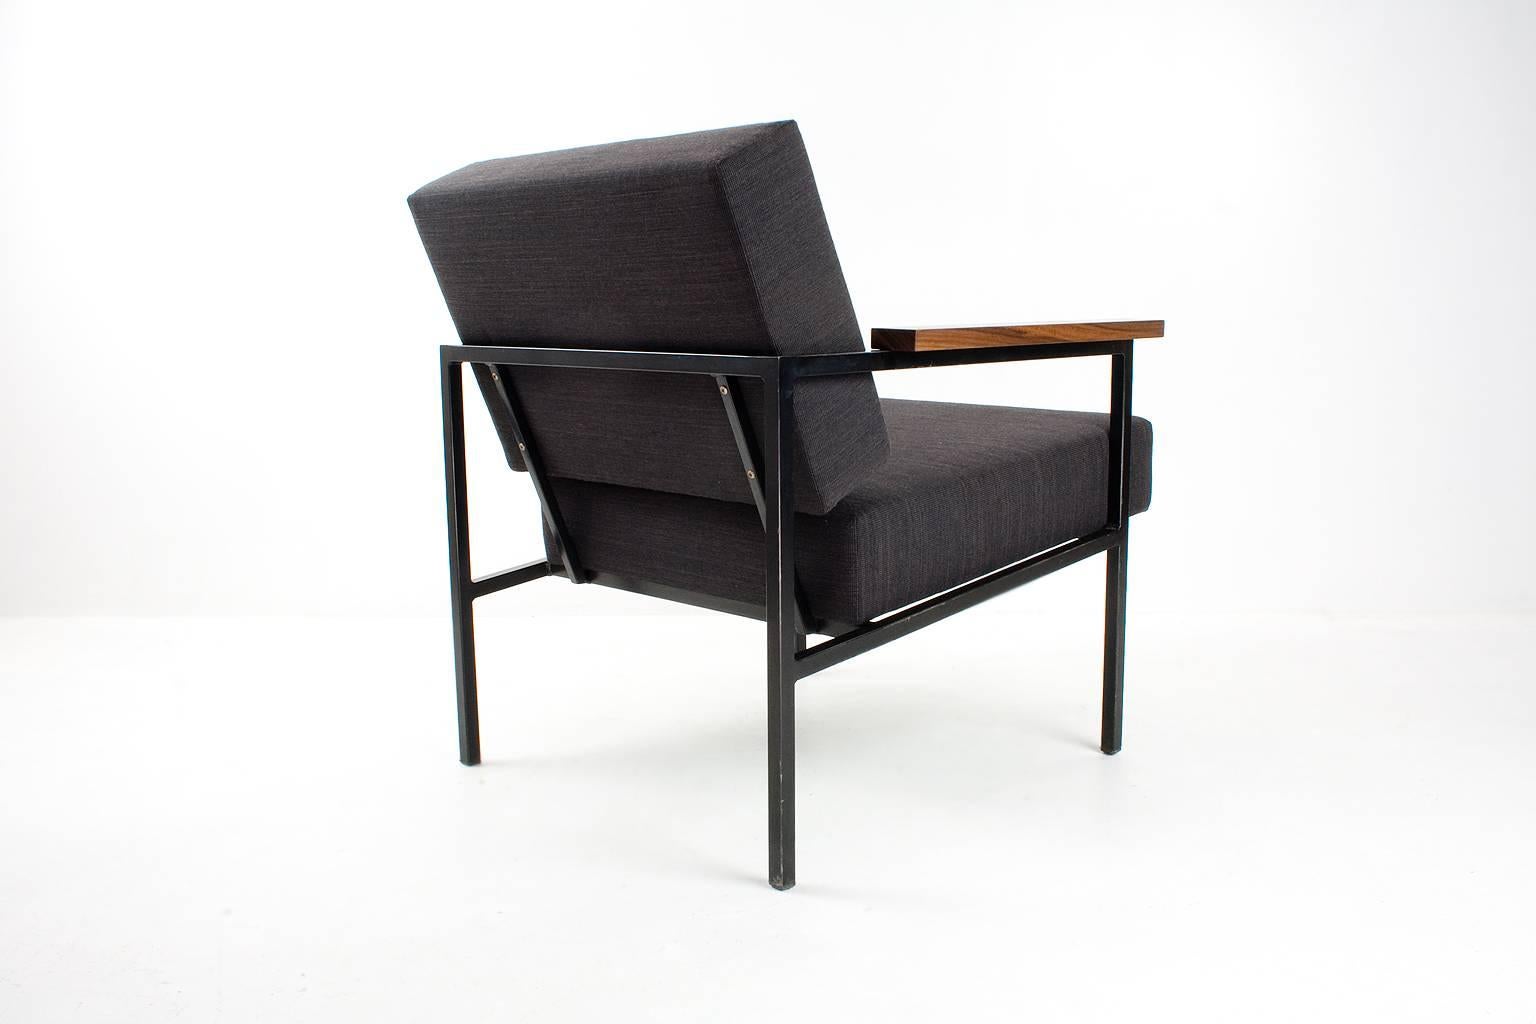 Re-upholstered 1950s Dutch Mid-Century Modern lounge chair. The item is new upholstered in the 